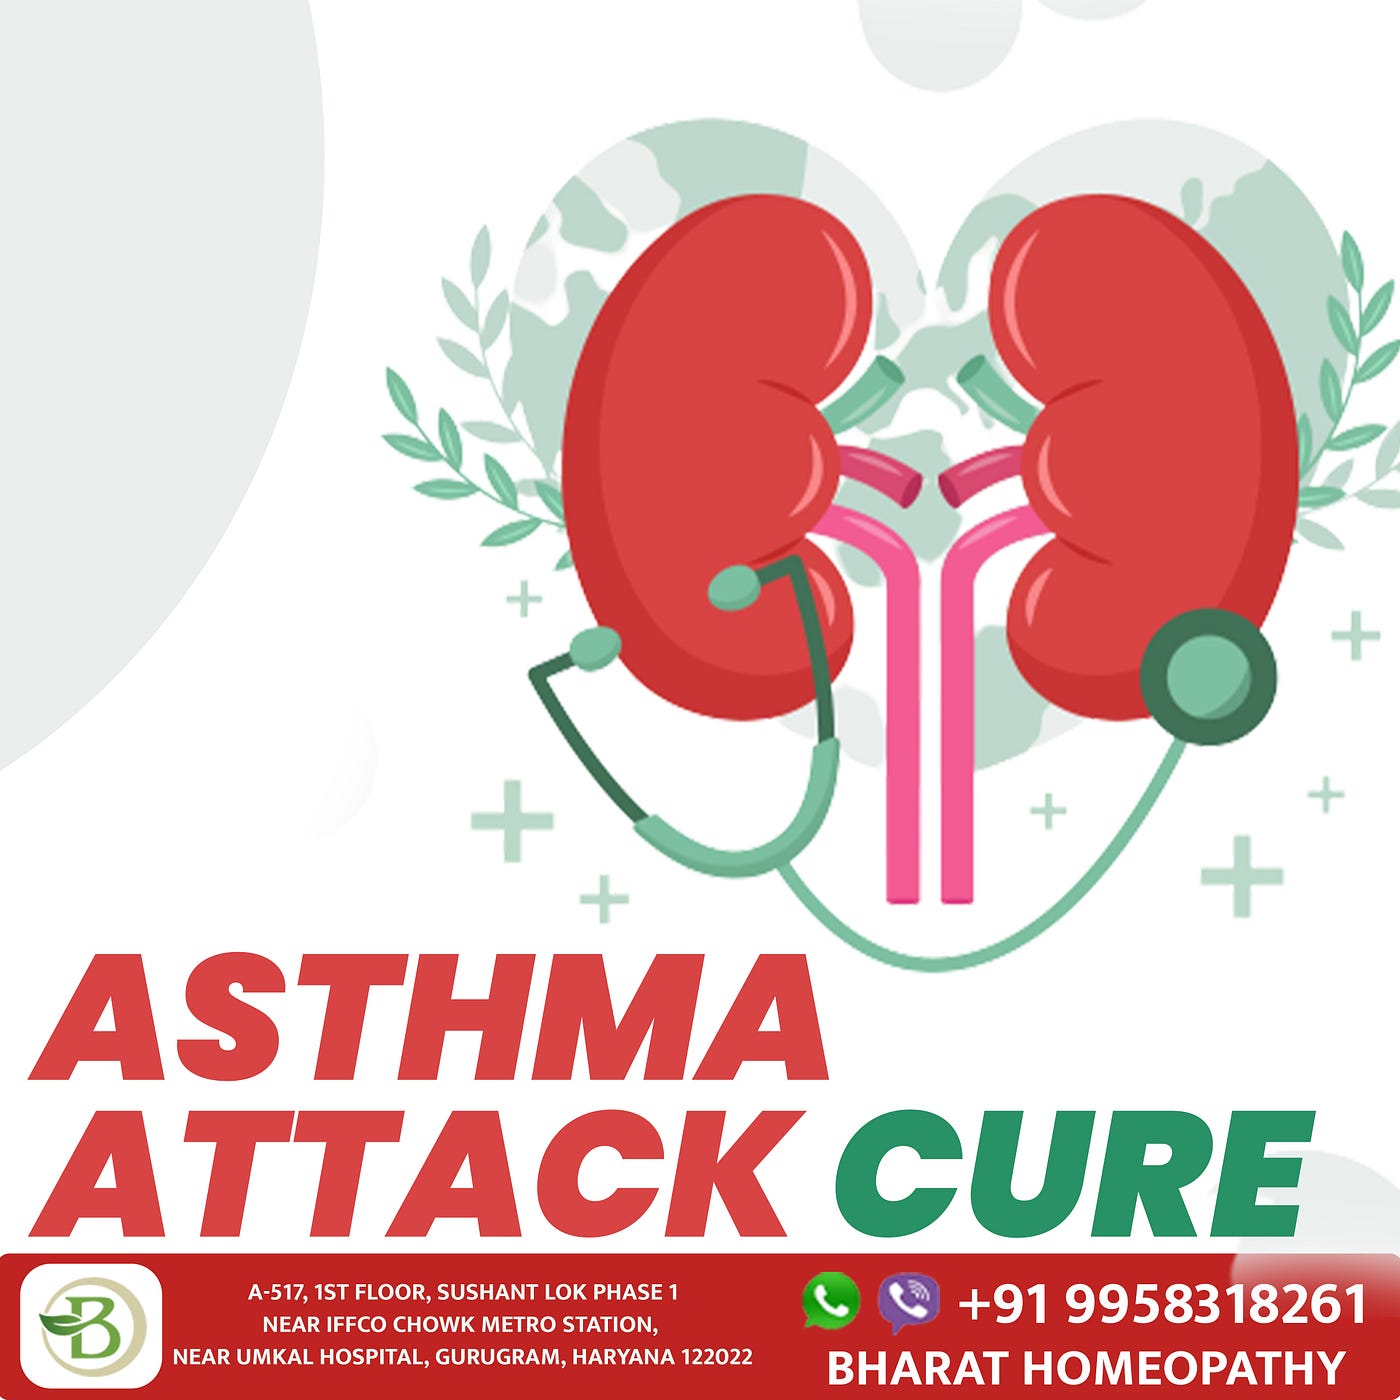 Asthma treatment by homeopathy. Asthma treatment by homeopathy